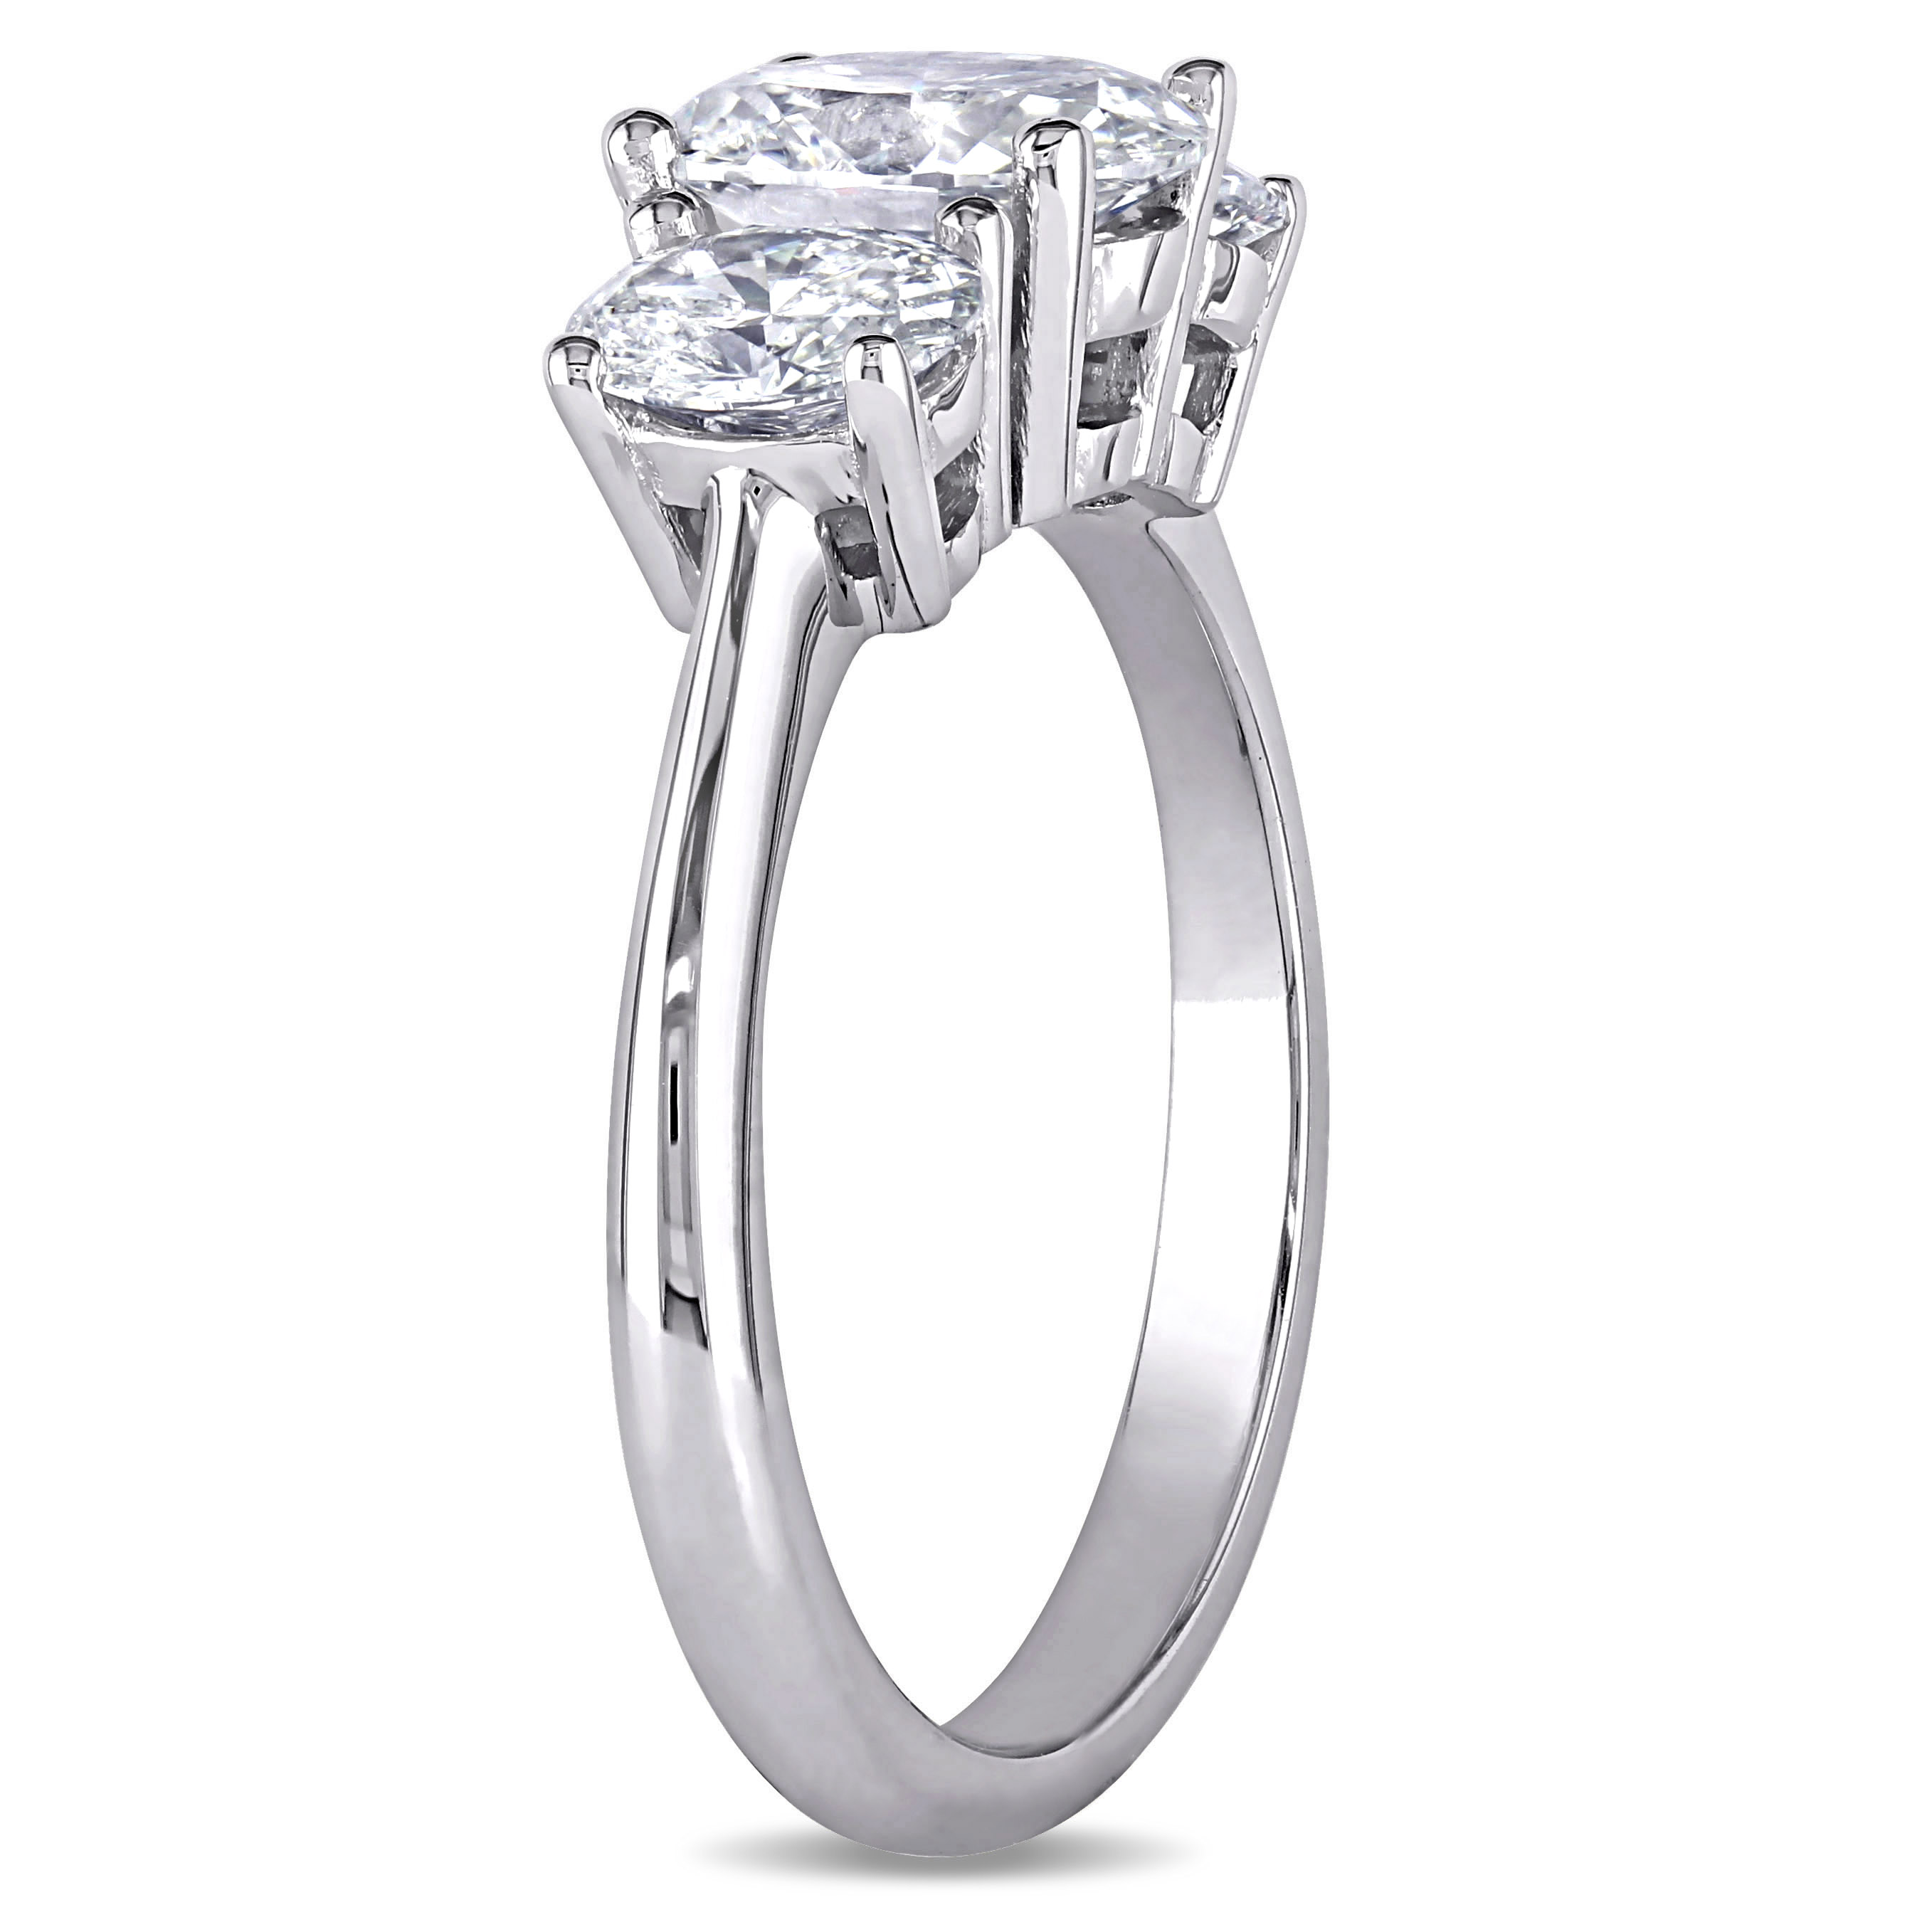 1 1/2 CT TW 3-Stone Oval Shape Diamond Engagement Ring in 18k White Gold